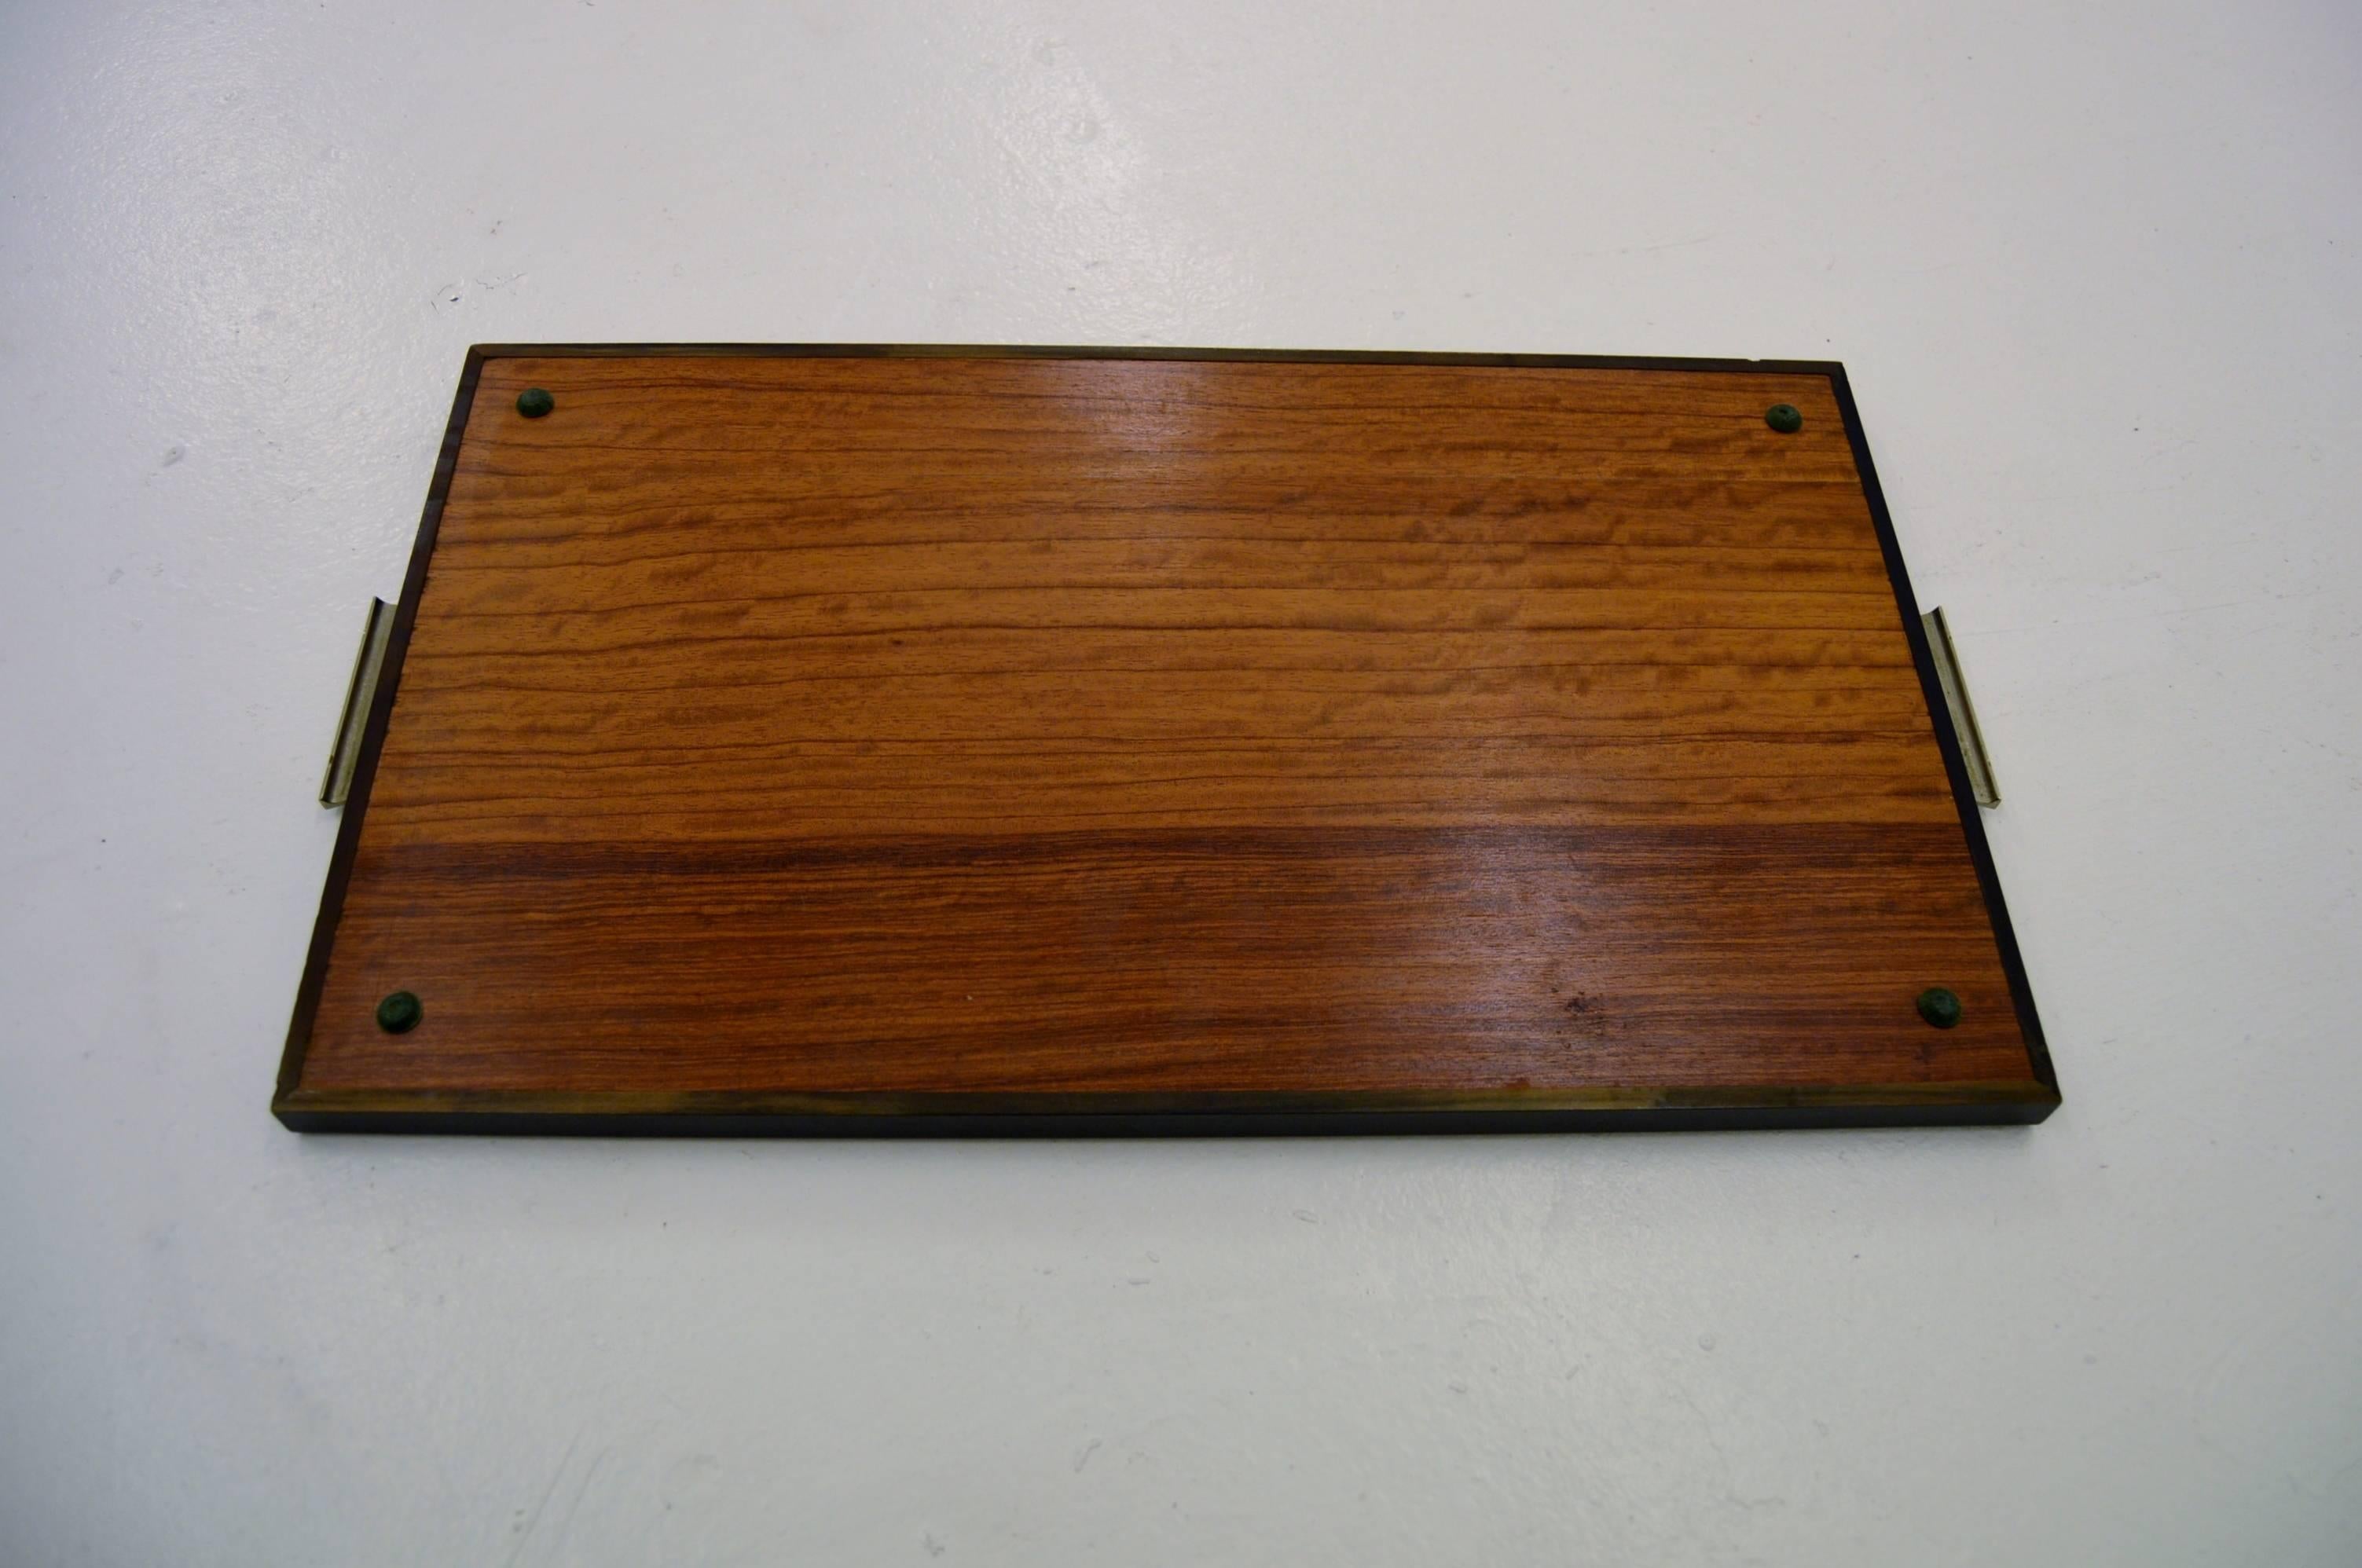 Elm Bar Serving Tray with Inlays from Mölby Intarsia, circa 1930s